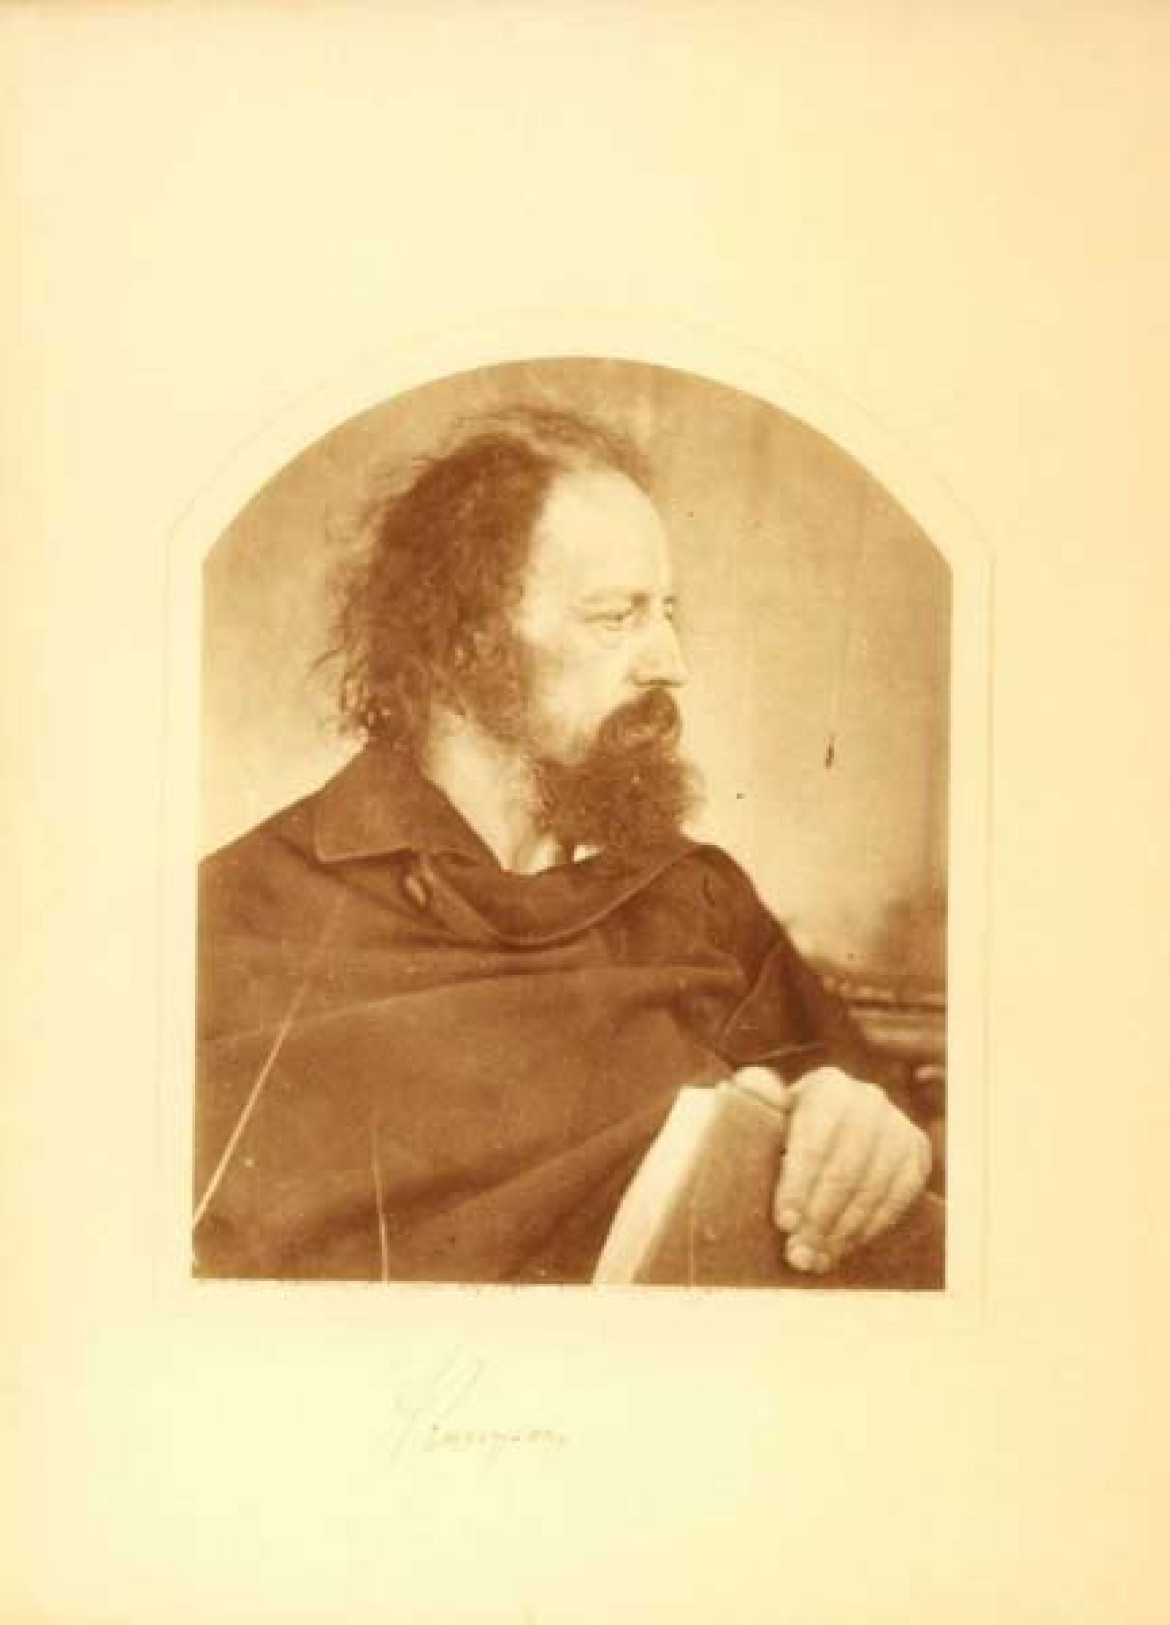 fot. Julia Margaret Cameron "The Dirty Monk" z wystawy "Idylls of the King"